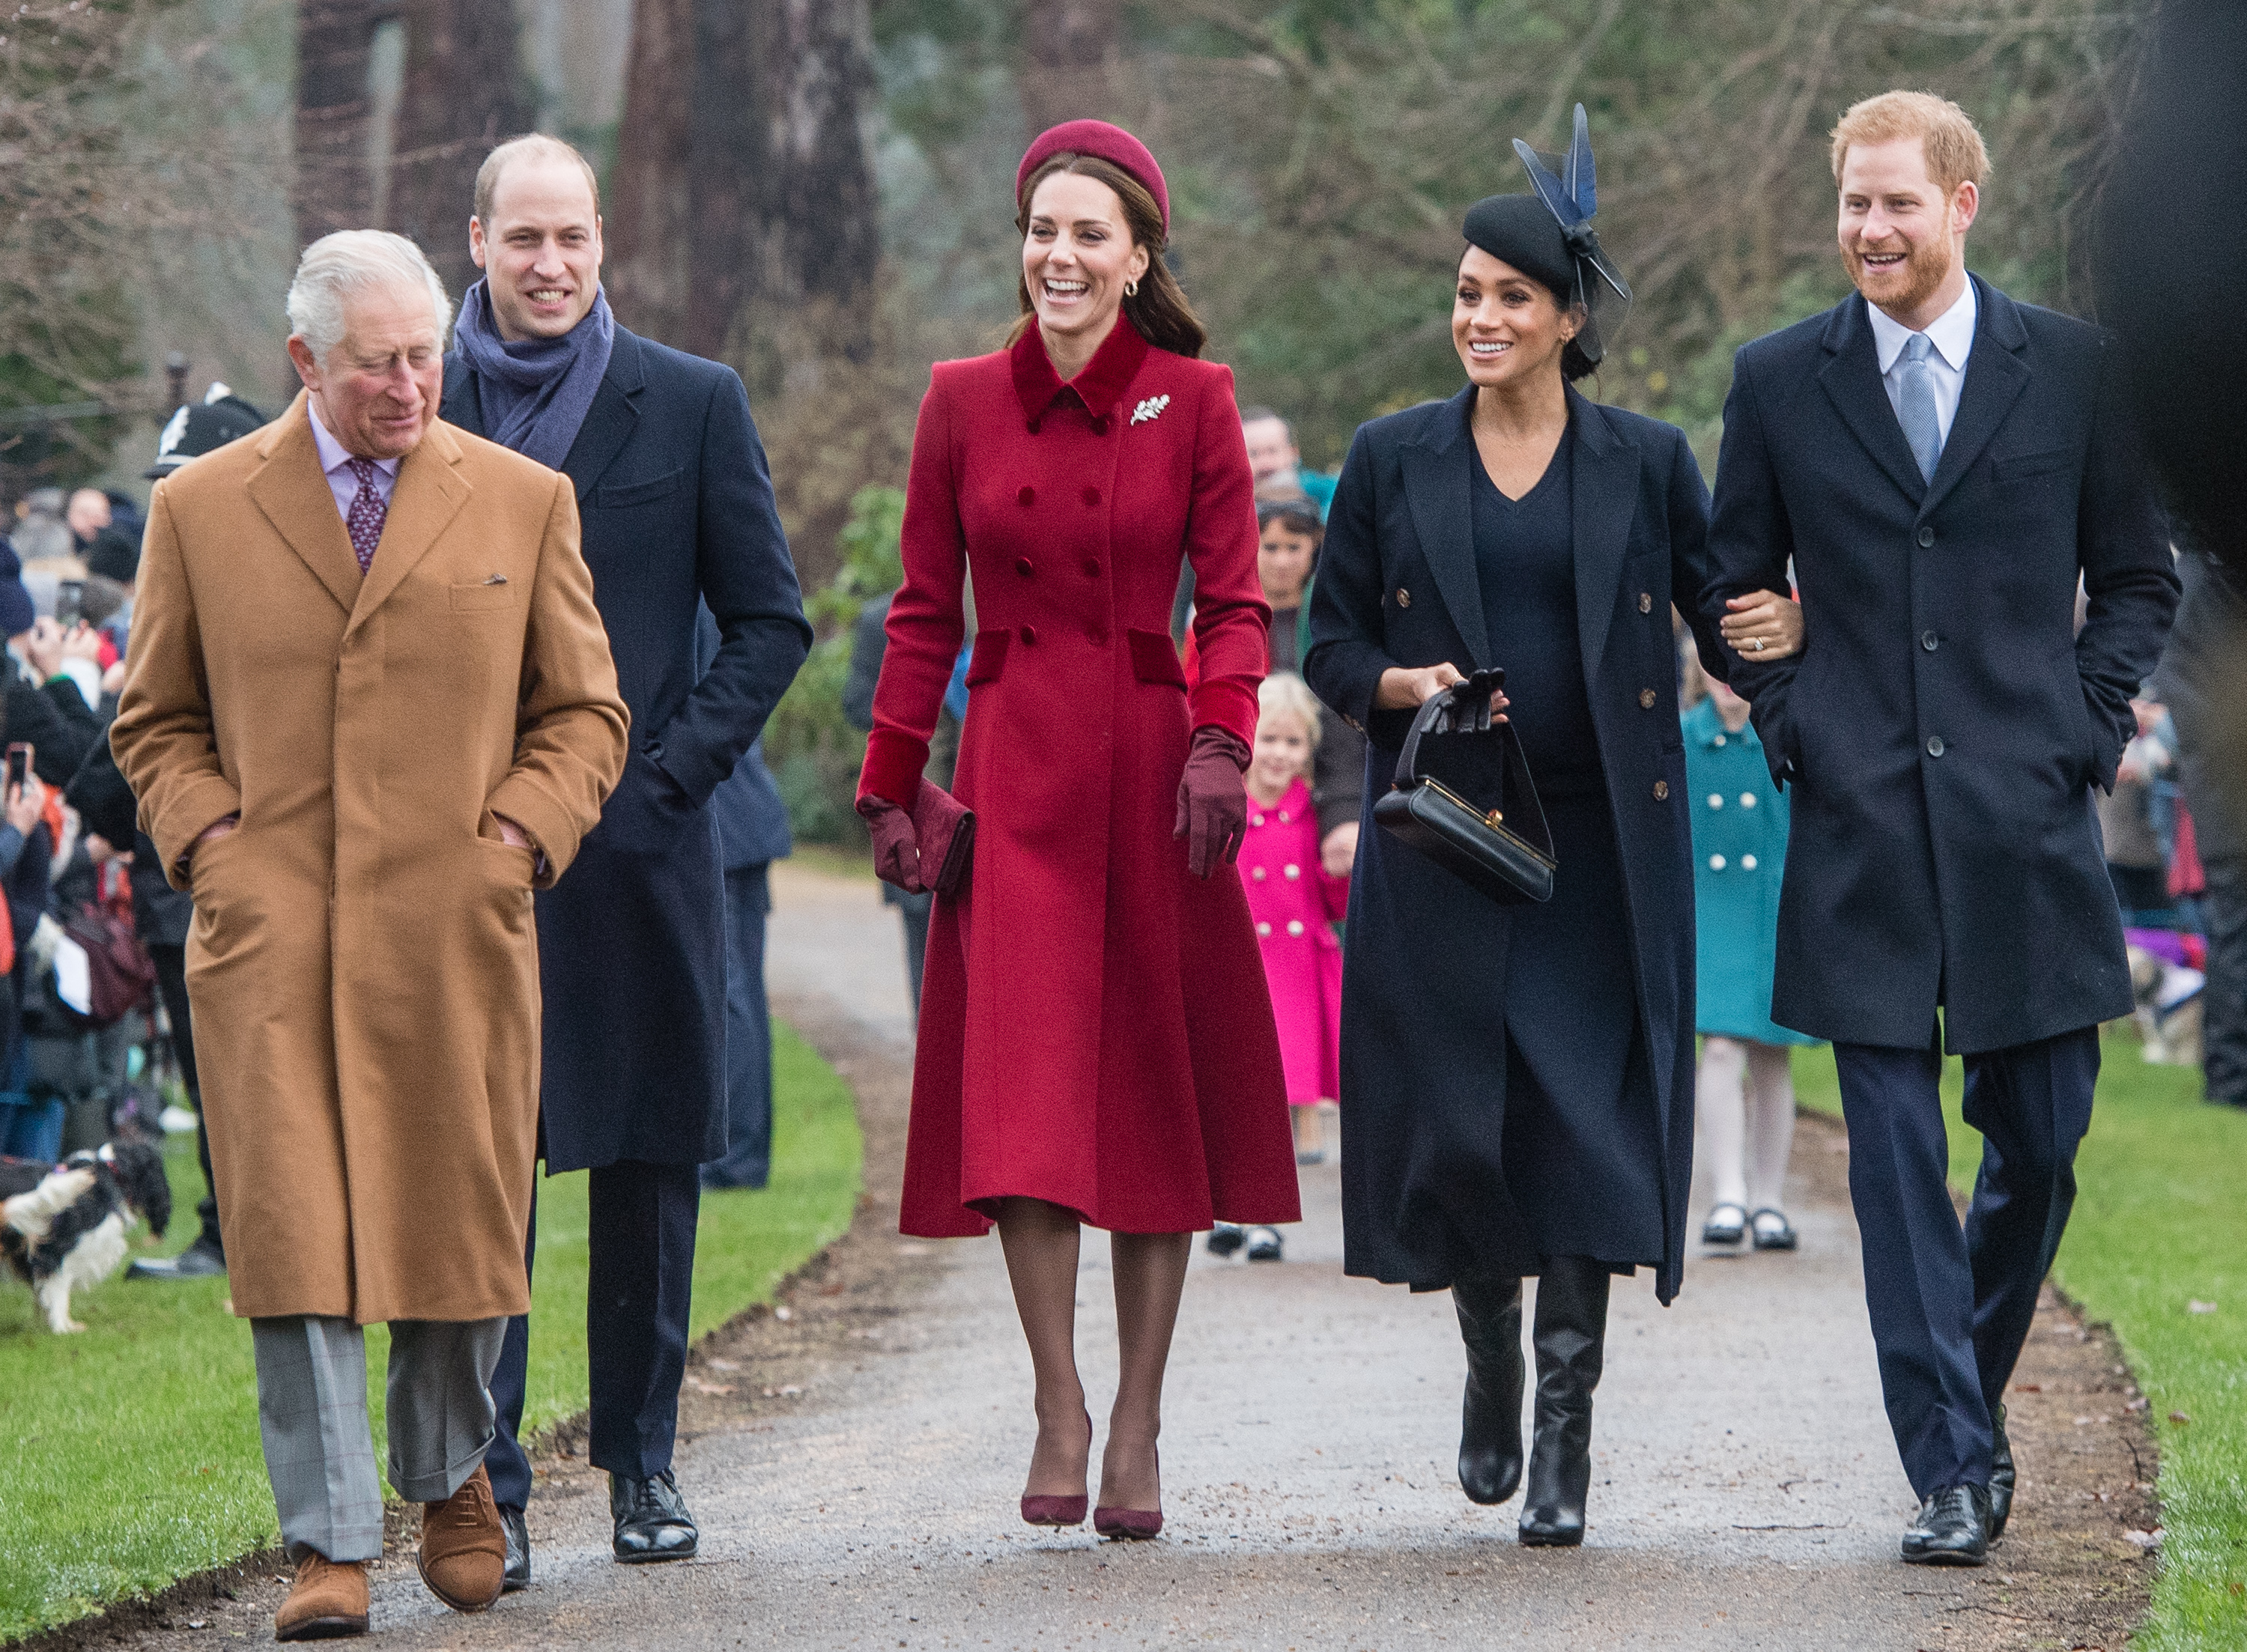 Prince Charles, Prince William, Duchess Kate, Duchess Meghan, and Prince Harry at Christmas Day Church service at Church of St Mary Magdalene on the Sandringham estate on December 25, 2018, in King's Lynn, England | Source: Getty Images